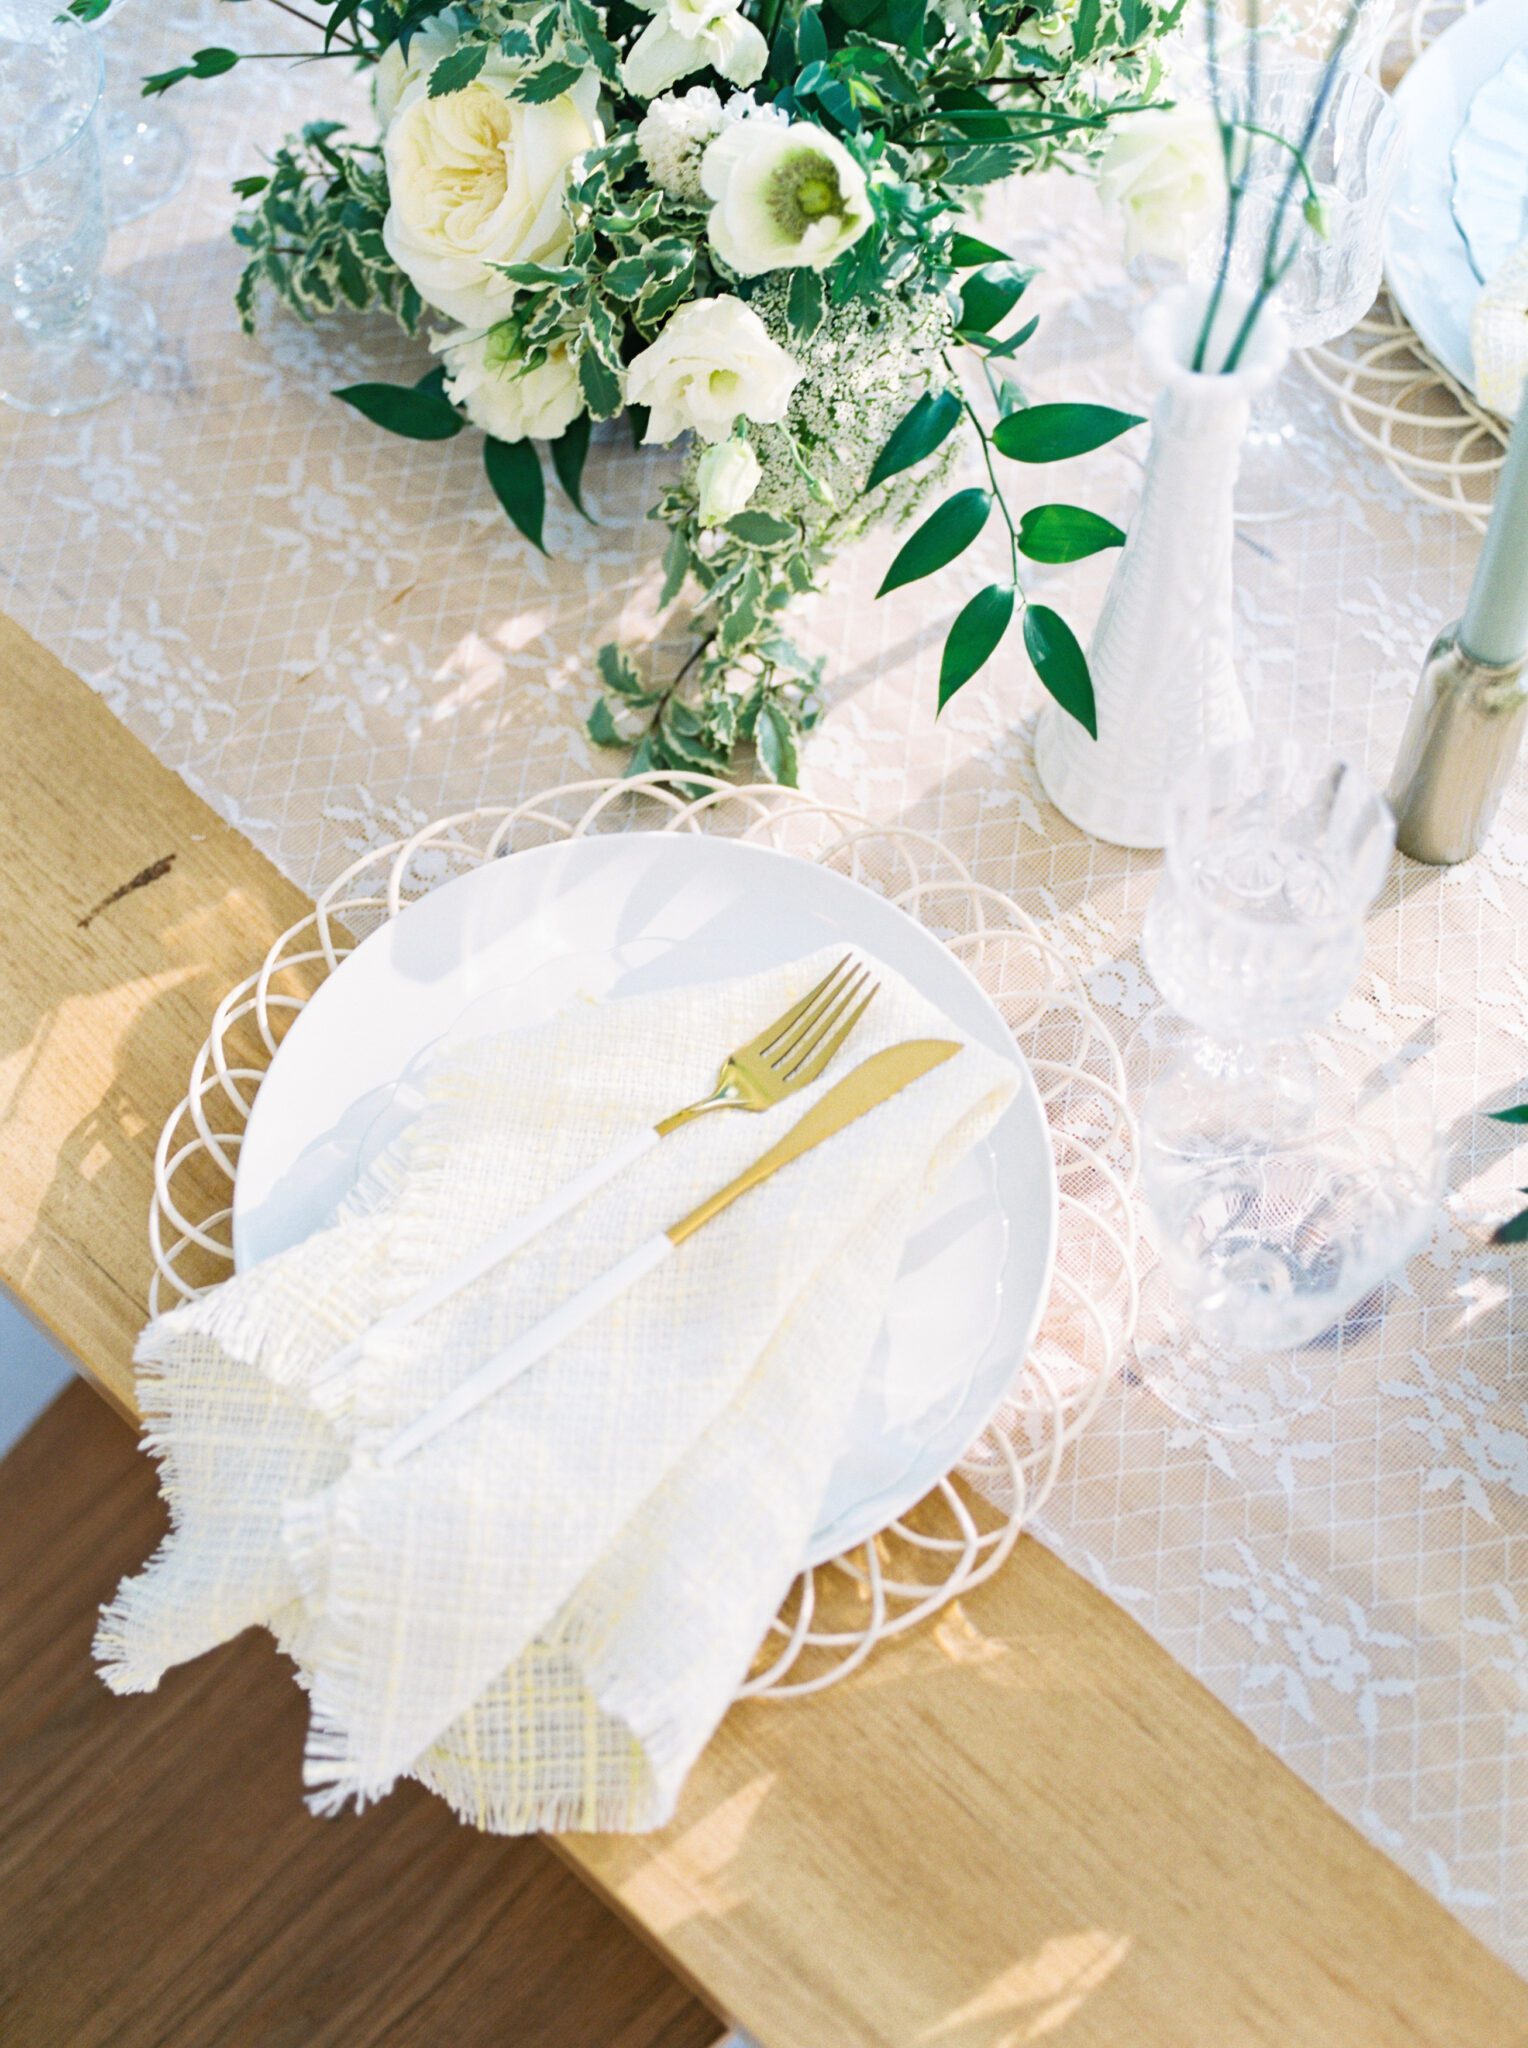 Elegant cottage core inspired wedding reception at Sparrow Lane Weddings and Events venue near Edmonton, Alberta. Fine art summer wedding. Outdoor summer wedding tablescape with lush florals in pale yellow, ivory and white with greenery. Wicker charger plates, and golden cutlery.